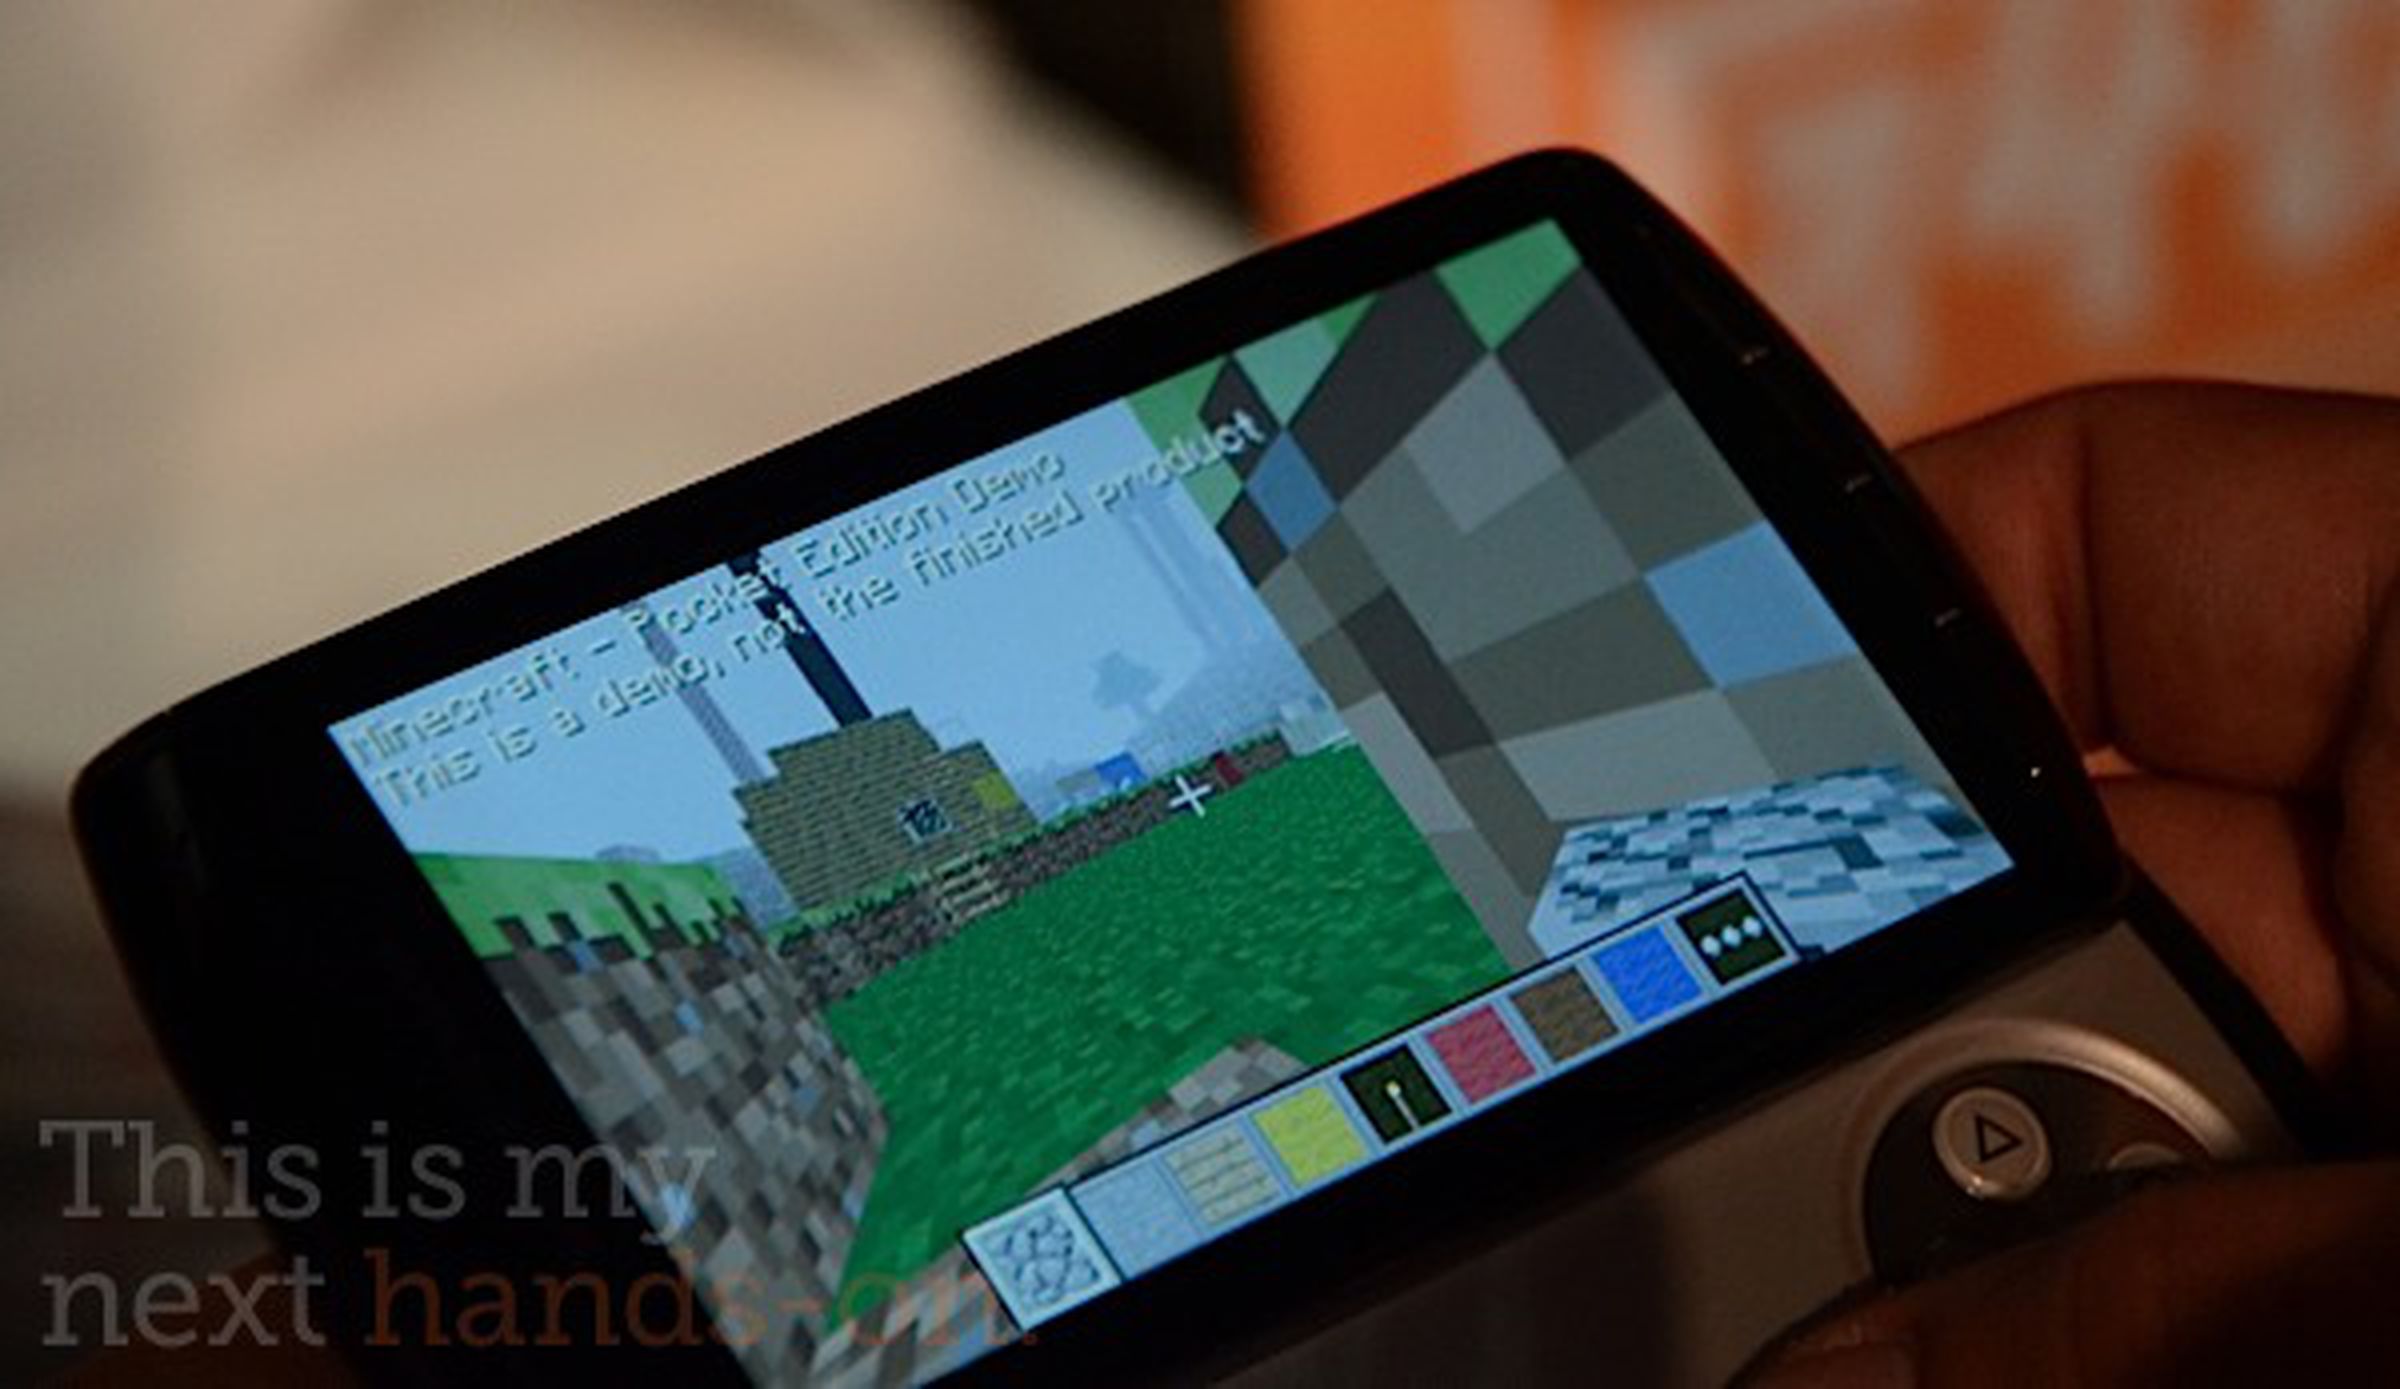 Minecraft Pocket Edition on the Xperia Play